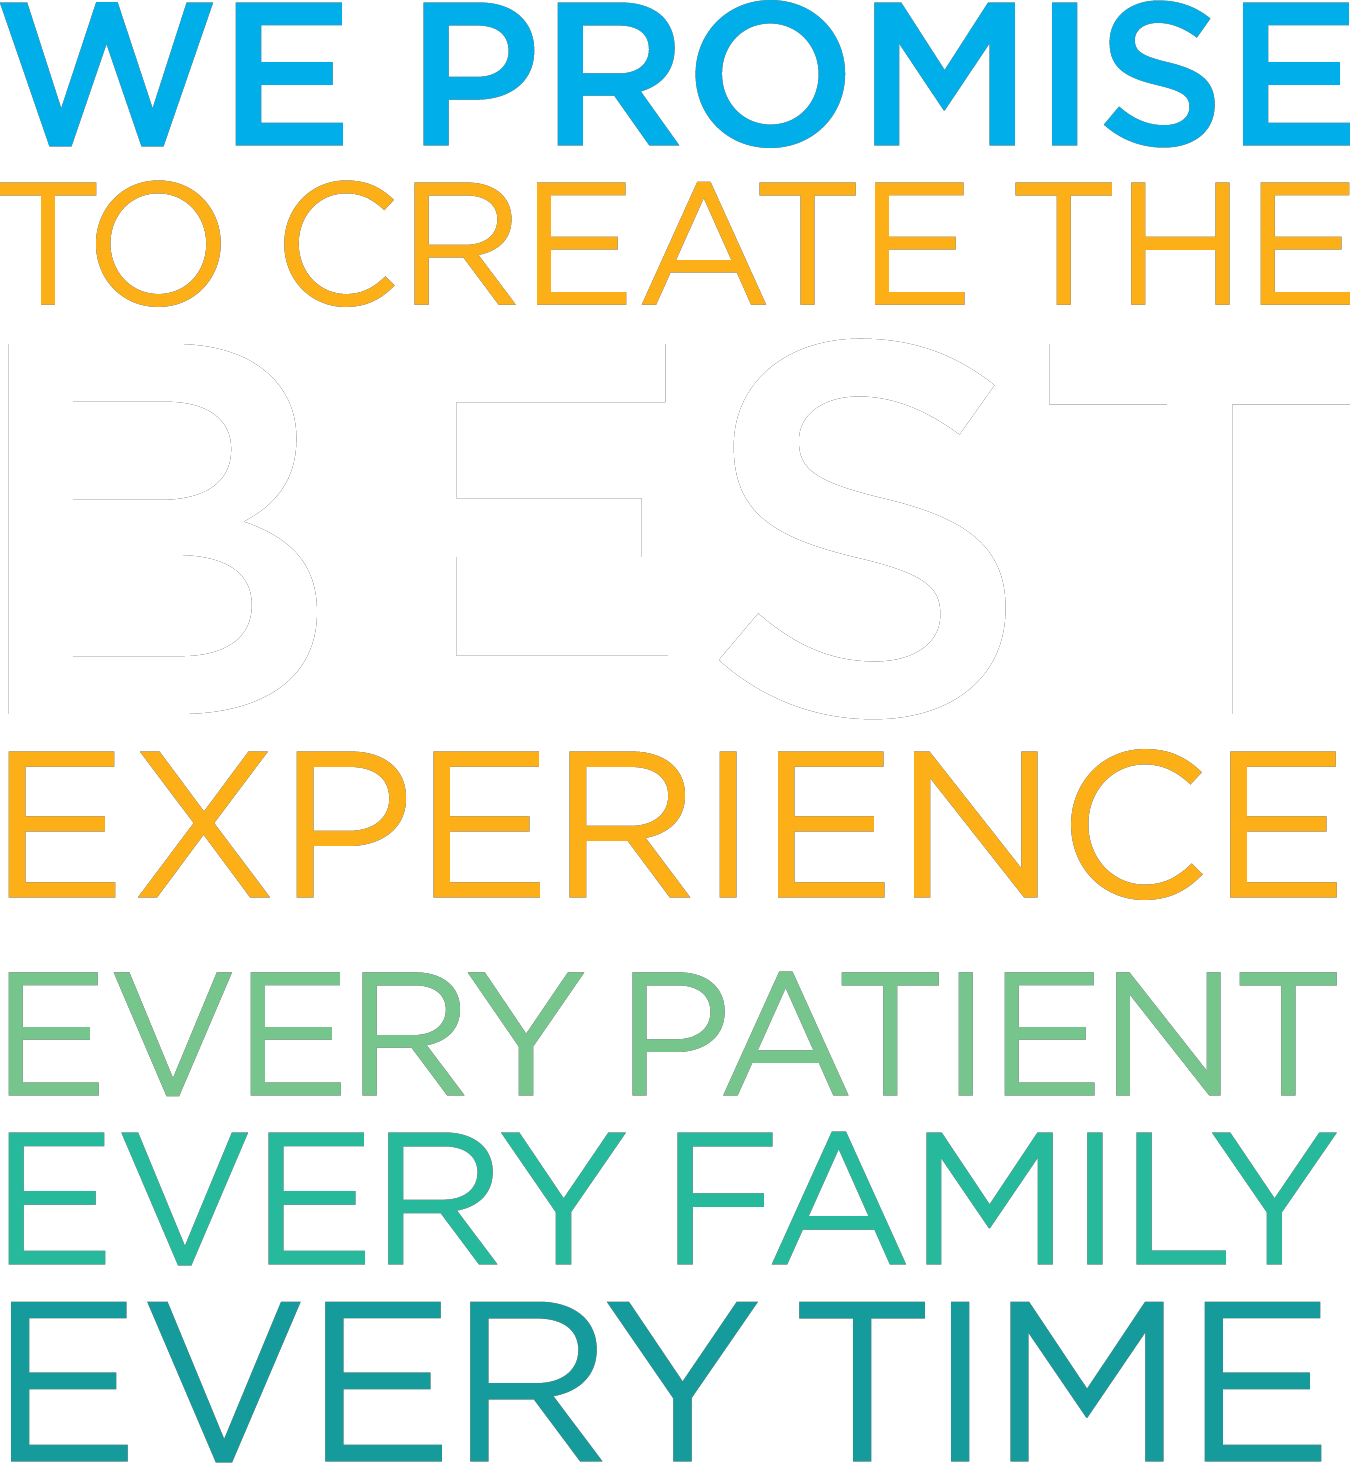 mountain valley mission - we promise to create the best experience - every patient, every family, every time